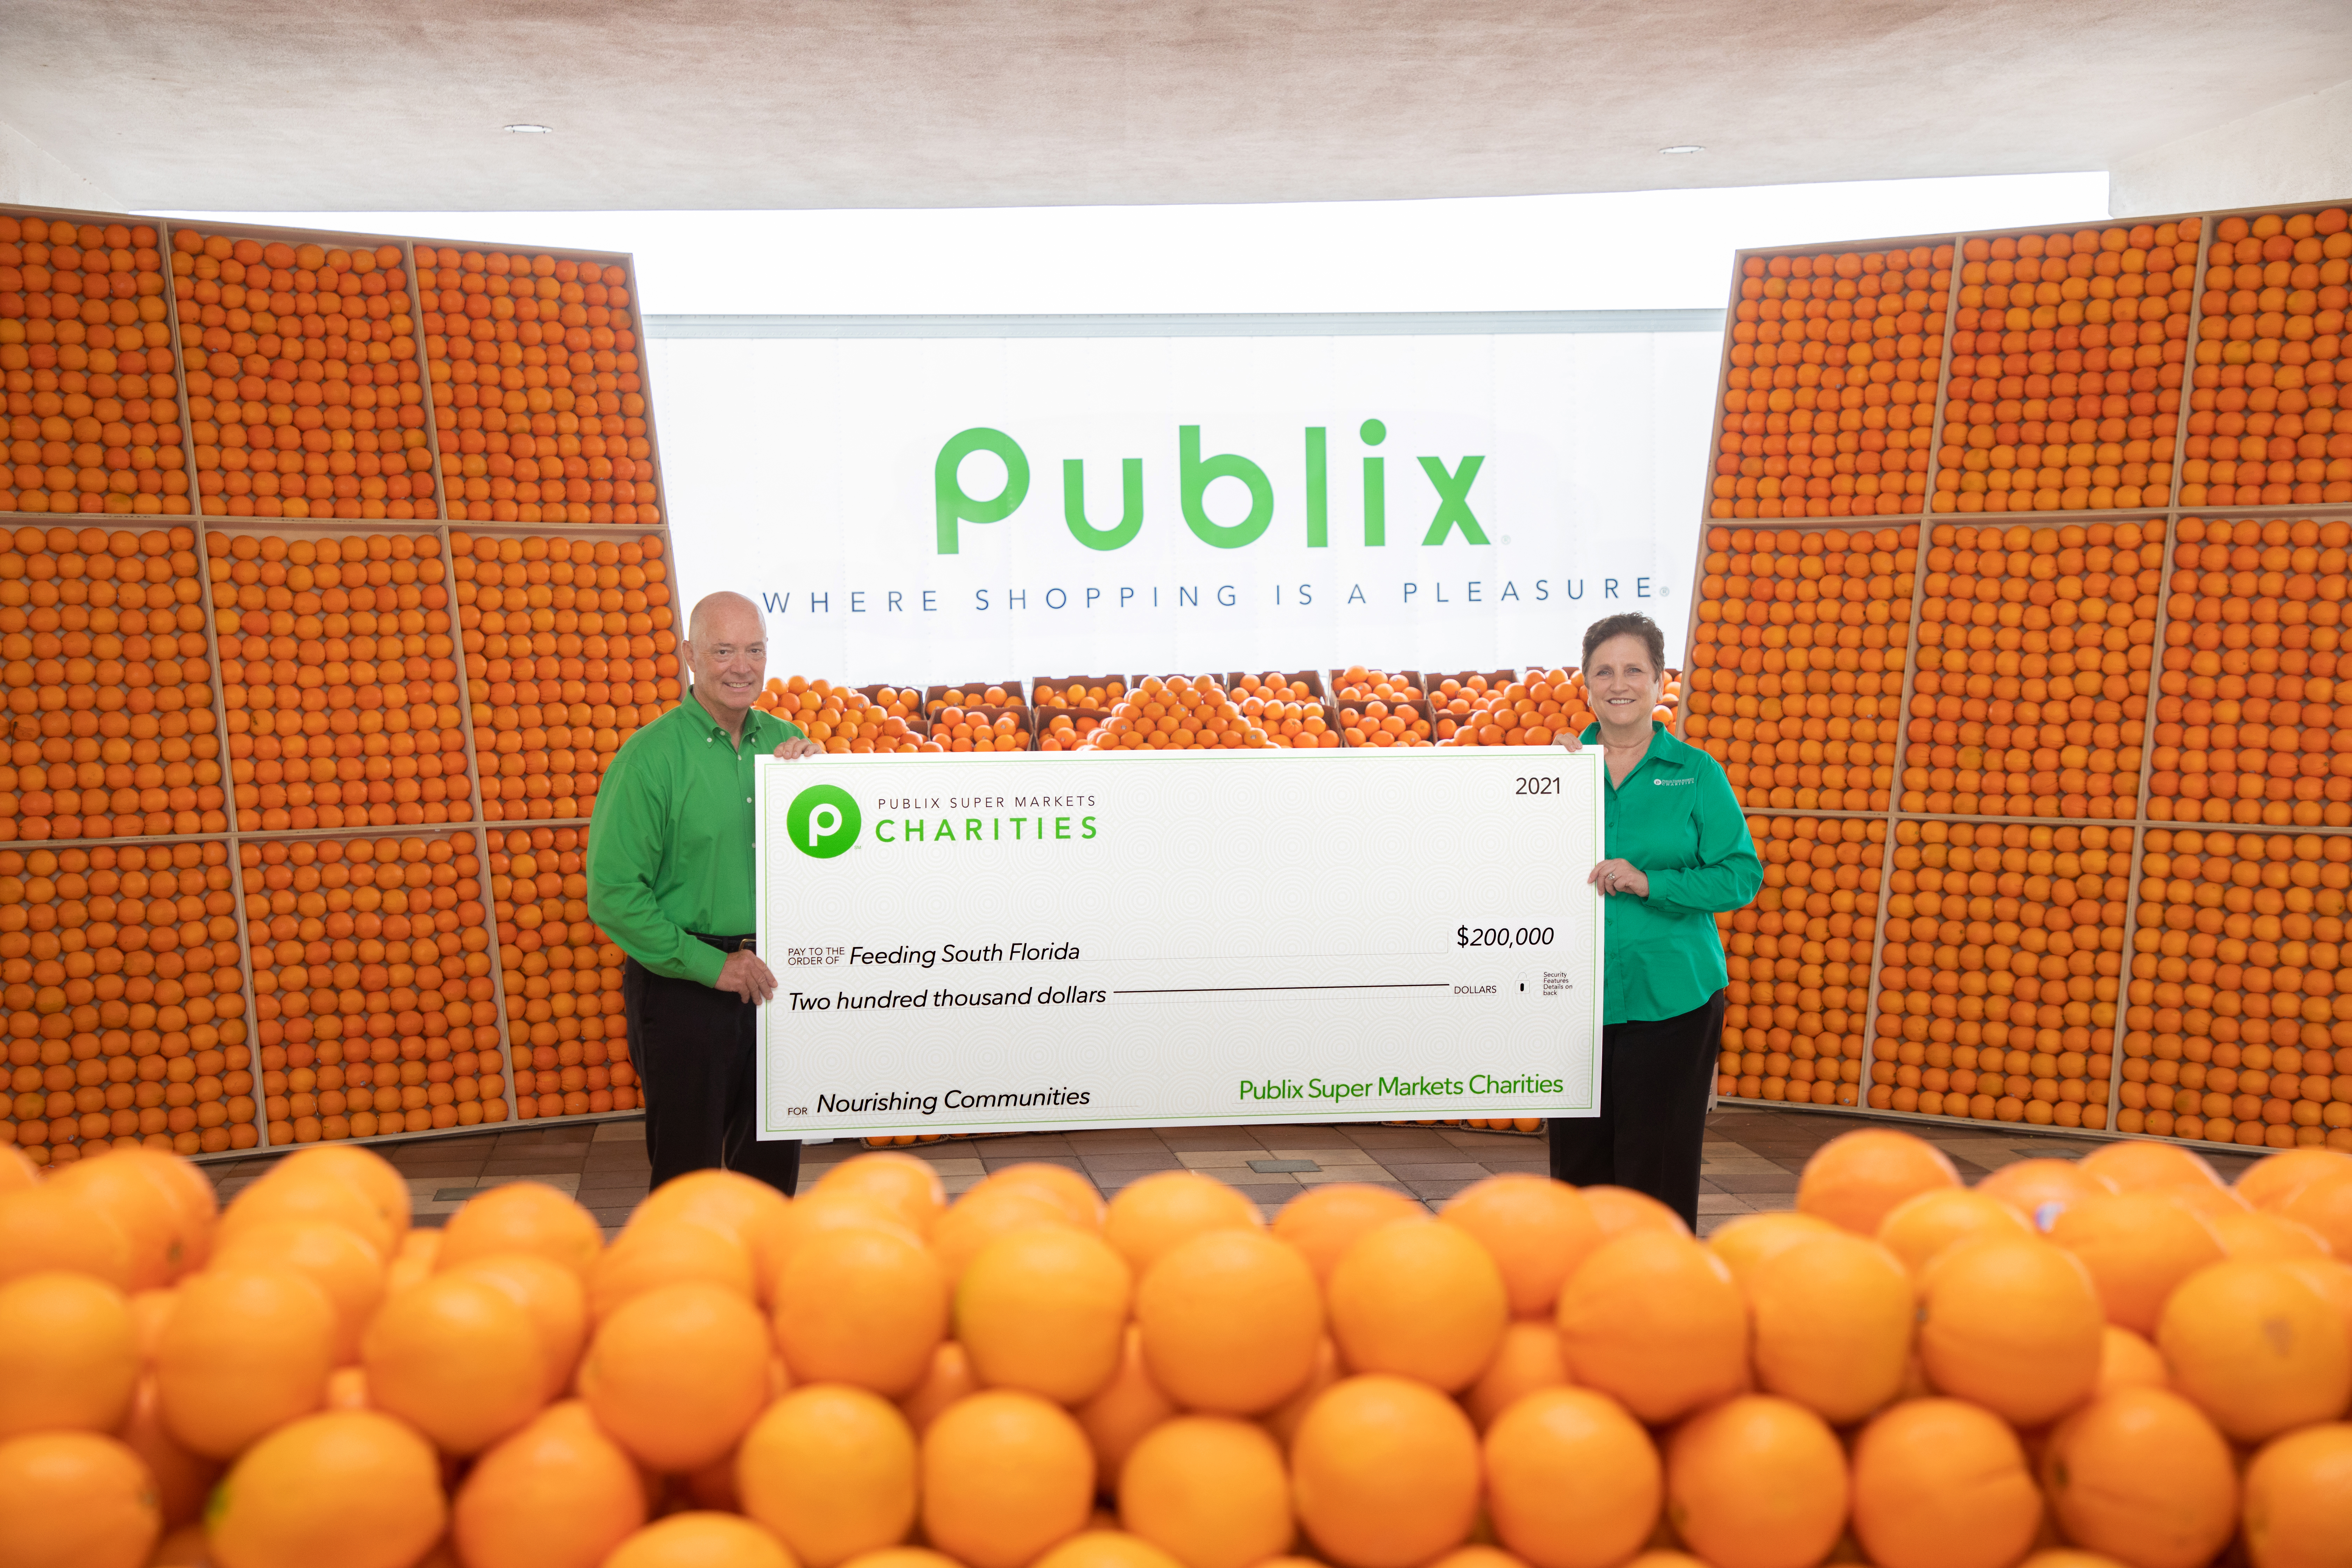 Publix Programs Addressing Food Insecurity - 7